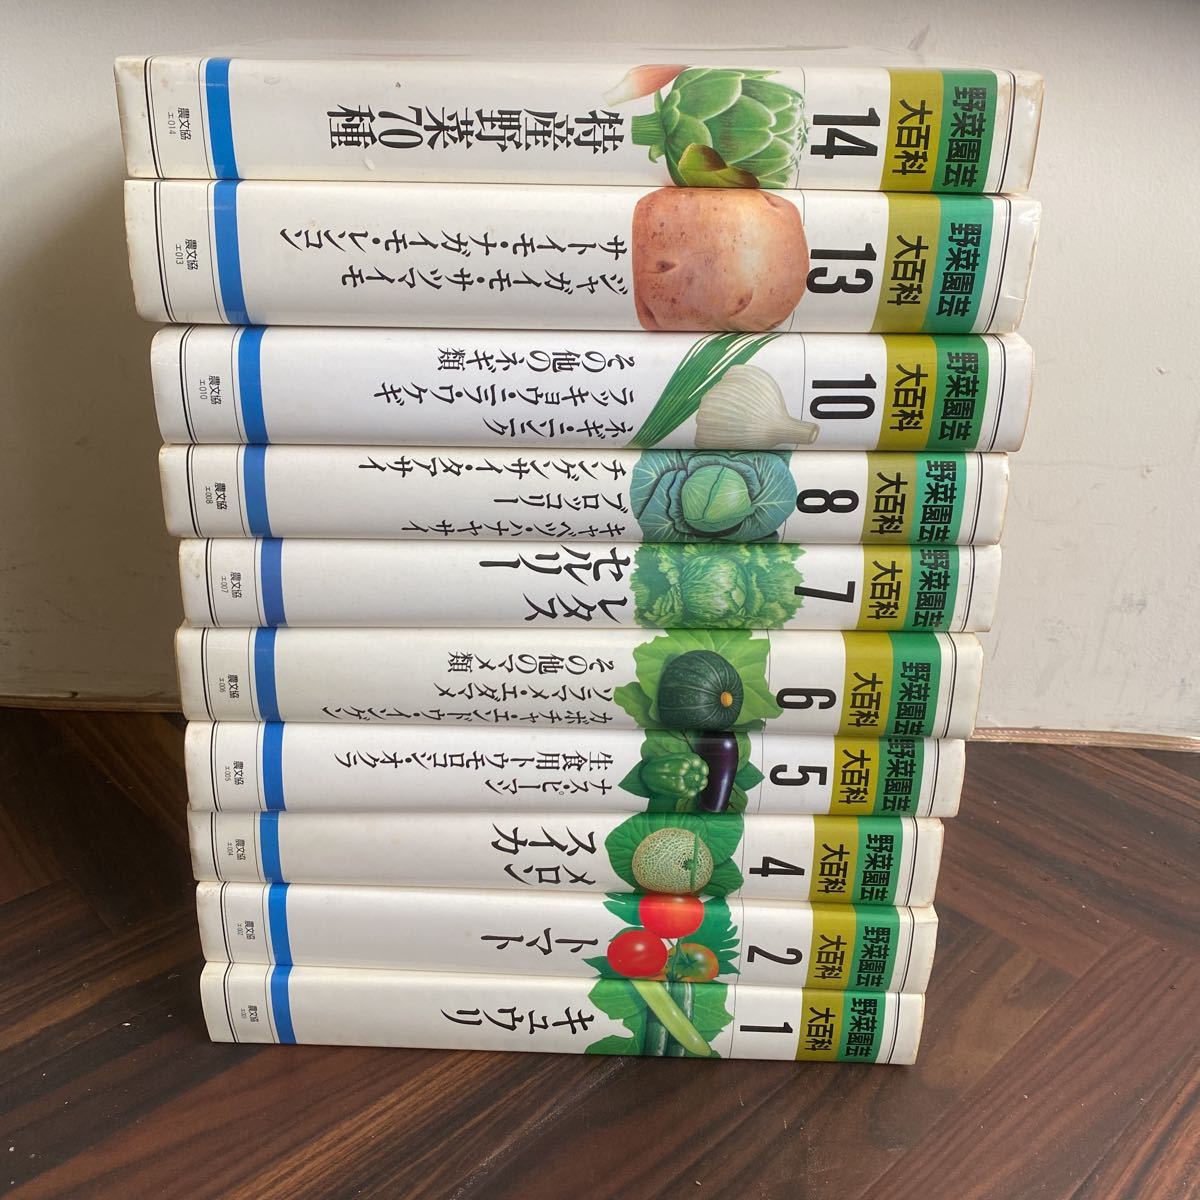 A73 vegetable gardening large various subjects 10 pcs. set agriculture writing . tomato cucumber melon jagaimo welsh onion etc. various together agriculture . agriculture 